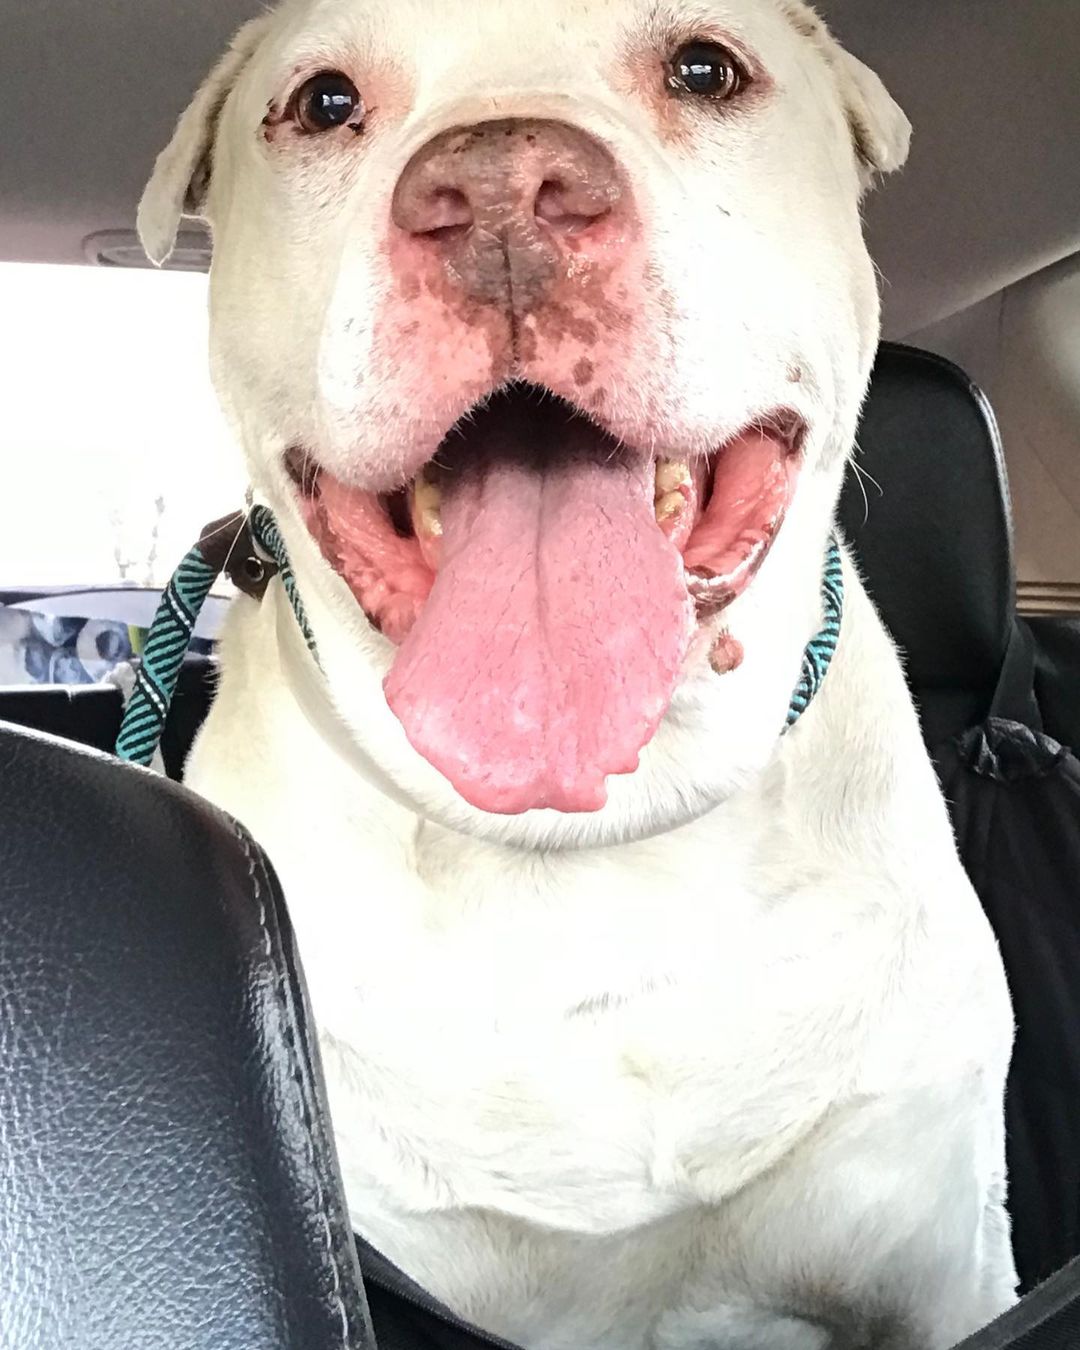 We would officially like to introduce you to Patrick. This sweet deaf senior was found wandering around the Bronx and was taken in by our friends at BACC. When they reached out to us about helping him we noticed that he was found the same day we had to set our sweet Fossil free. 

We immediately reached out to our superstar fospice mom Lisa and she asked if we could go meet him. We did just that and before Patrick was placed back in his kennel he had stolen Lisa’s heart. 

Before Patrick can begin his brand new life with Lisa he has quite a few medical issues to address. He has multiple tumors including testicular tumors that need to be removed, bad teeth, ear infections, and some potential kidney issues. 

BACC @nycacc was hoping to find him a hospice situation and we are grateful we could help. We definitely believe Fossil sent us to help him and we won’t let him down. Please consider helping Patrick today by making a lifesaving donation 🙏 <a target='_blank' href='https://www.instagram.com/explore/tags/FossilSentUs/'>#FossilSentUs</a> <a target='_blank' href='https://www.instagram.com/explore/tags/savingseniordogs/'>#savingseniordogs</a> <a target='_blank' href='https://www.instagram.com/explore/tags/pitbull/'>#pitbull</a> <a target='_blank' href='https://www.instagram.com/explore/tags/pitbullsofinstagram/'>#pitbullsofinstagram</a> <a target='_blank' href='https://www.instagram.com/explore/tags/rescuedogsofinstagram/'>#rescuedogsofinstagram</a> <a target='_blank' href='https://www.instagram.com/explore/tags/rescuedog/'>#rescuedog</a> <a target='_blank' href='https://www.instagram.com/explore/tags/whitedog/'>#whitedog</a> <a target='_blank' href='https://www.instagram.com/explore/tags/rescueismydrug/'>#rescueismydrug</a> <a target='_blank' href='https://www.instagram.com/explore/tags/rockawaybeach/'>#rockawaybeach</a> <a target='_blank' href='https://www.instagram.com/explore/tags/love/'>#love</a> <a target='_blank' href='https://www.instagram.com/explore/tags/dogs/'>#dogs</a> <a target='_blank' href='https://www.instagram.com/explore/tags/bigdogs/'>#bigdogs</a> <a target='_blank' href='https://www.instagram.com/explore/tags/nyacc/'>#nyacc</a> <a target='_blank' href='https://www.instagram.com/explore/tags/zionsentus/'>#zionsentus</a>